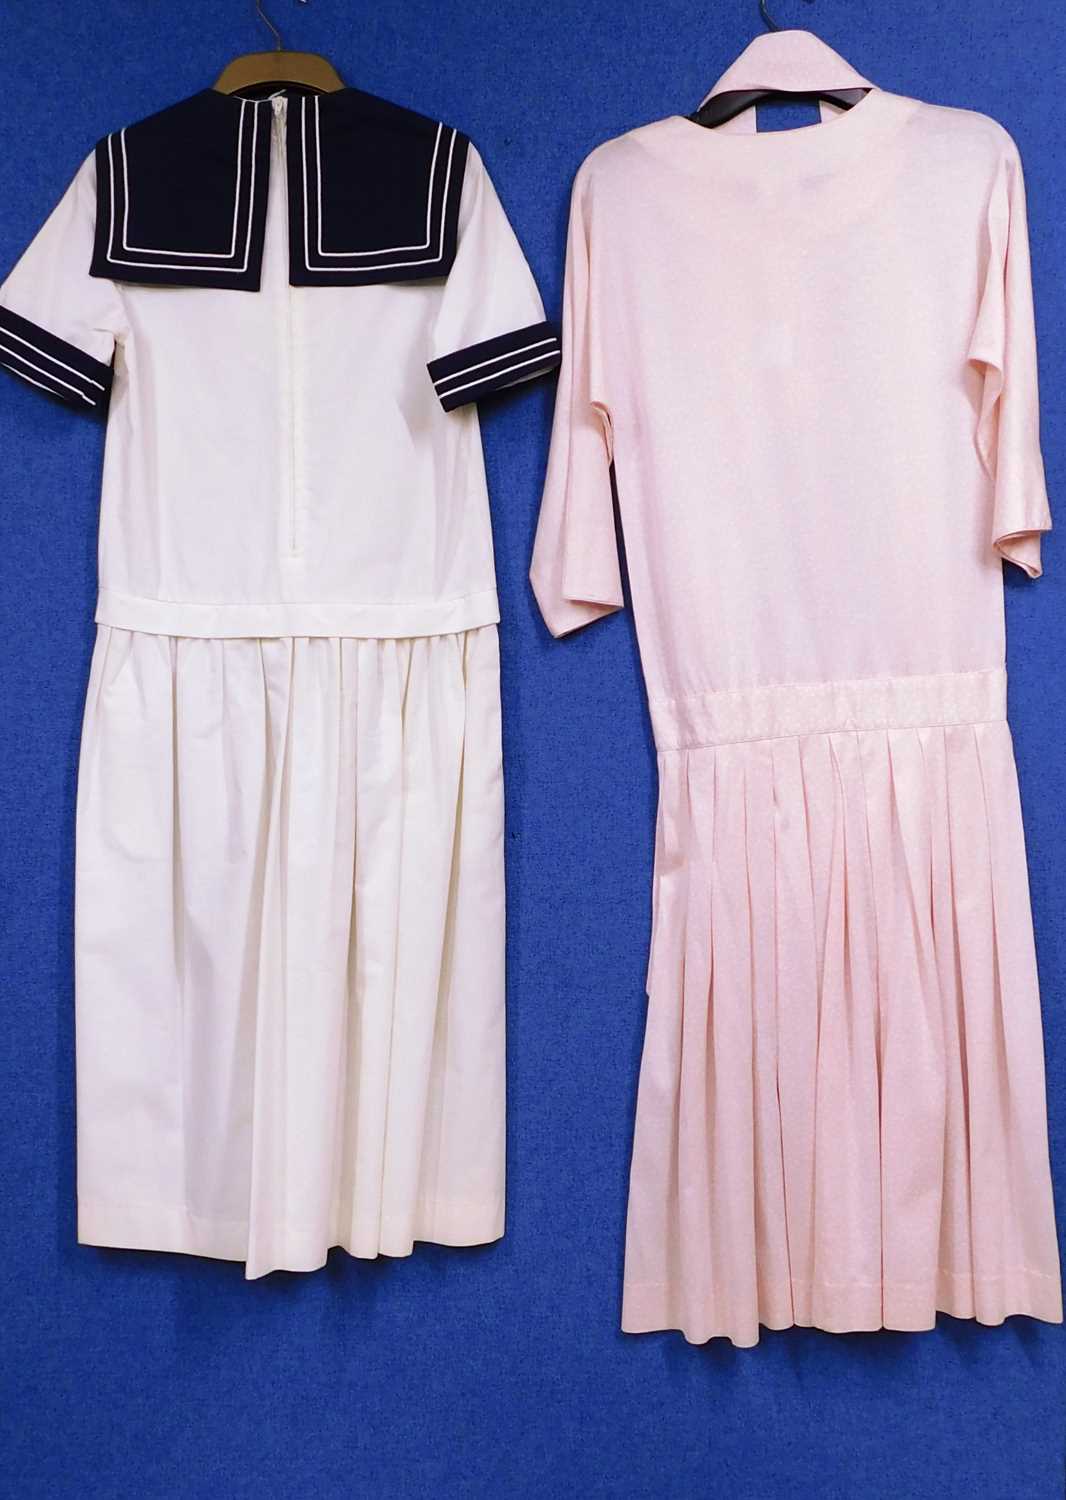 Two Laura Ashley dresses to include a cream and navy blue sailor dress and a pink and white - Image 7 of 9